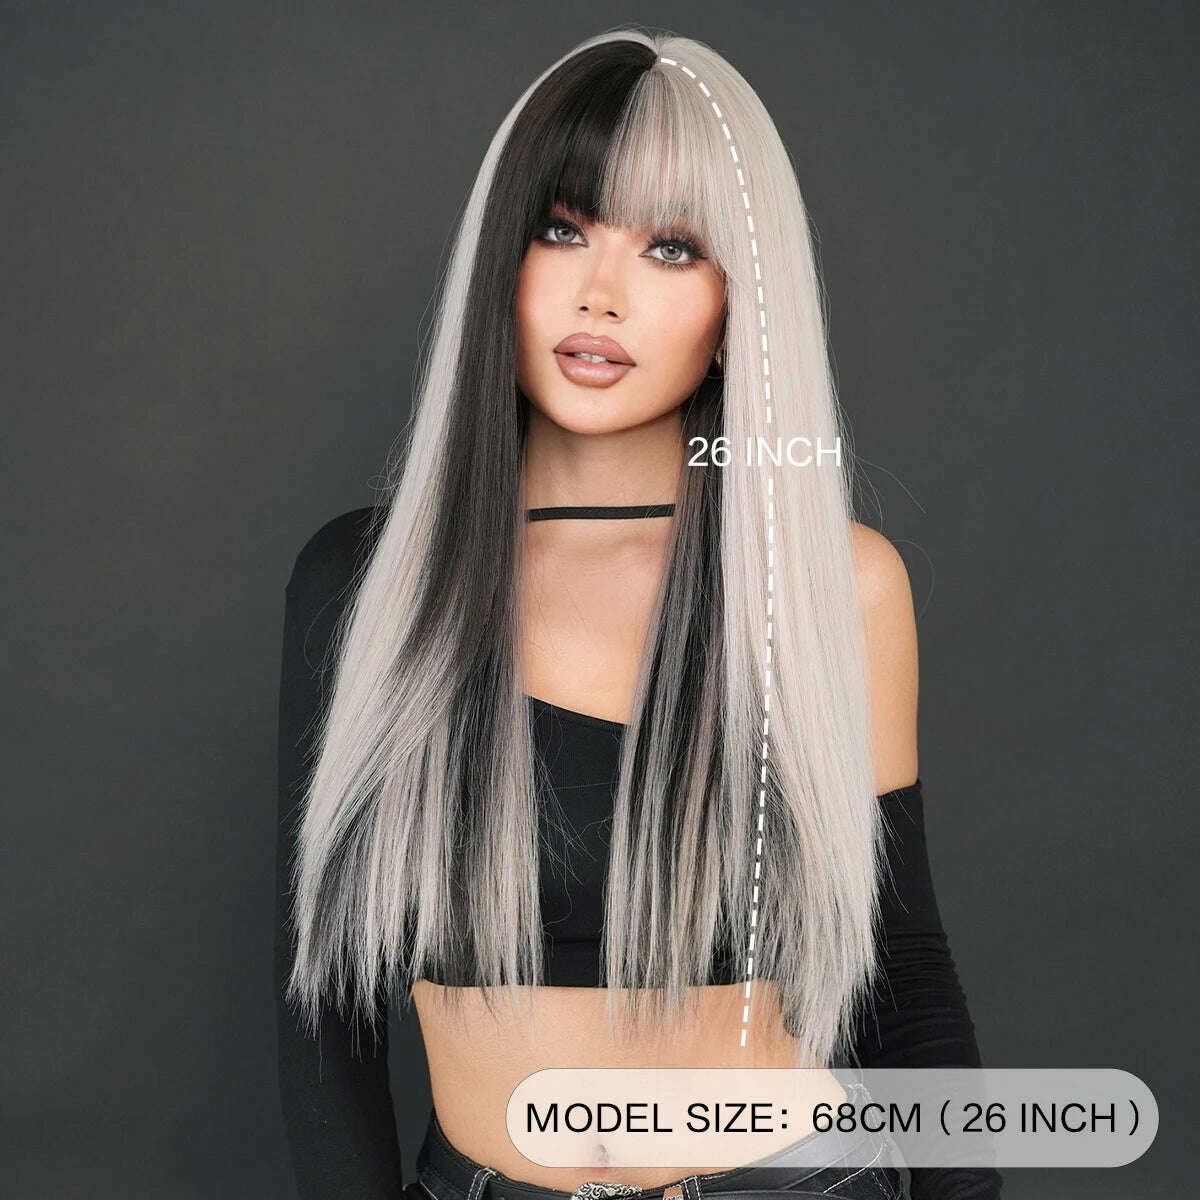 KIMLUD, NAMM Long Body Straight Silver Ash Hair Wig With Bangs For Women Daily Party High Density Hair Ombre Wigs Heat Resistant Fiber, KIMLUD Womens Clothes